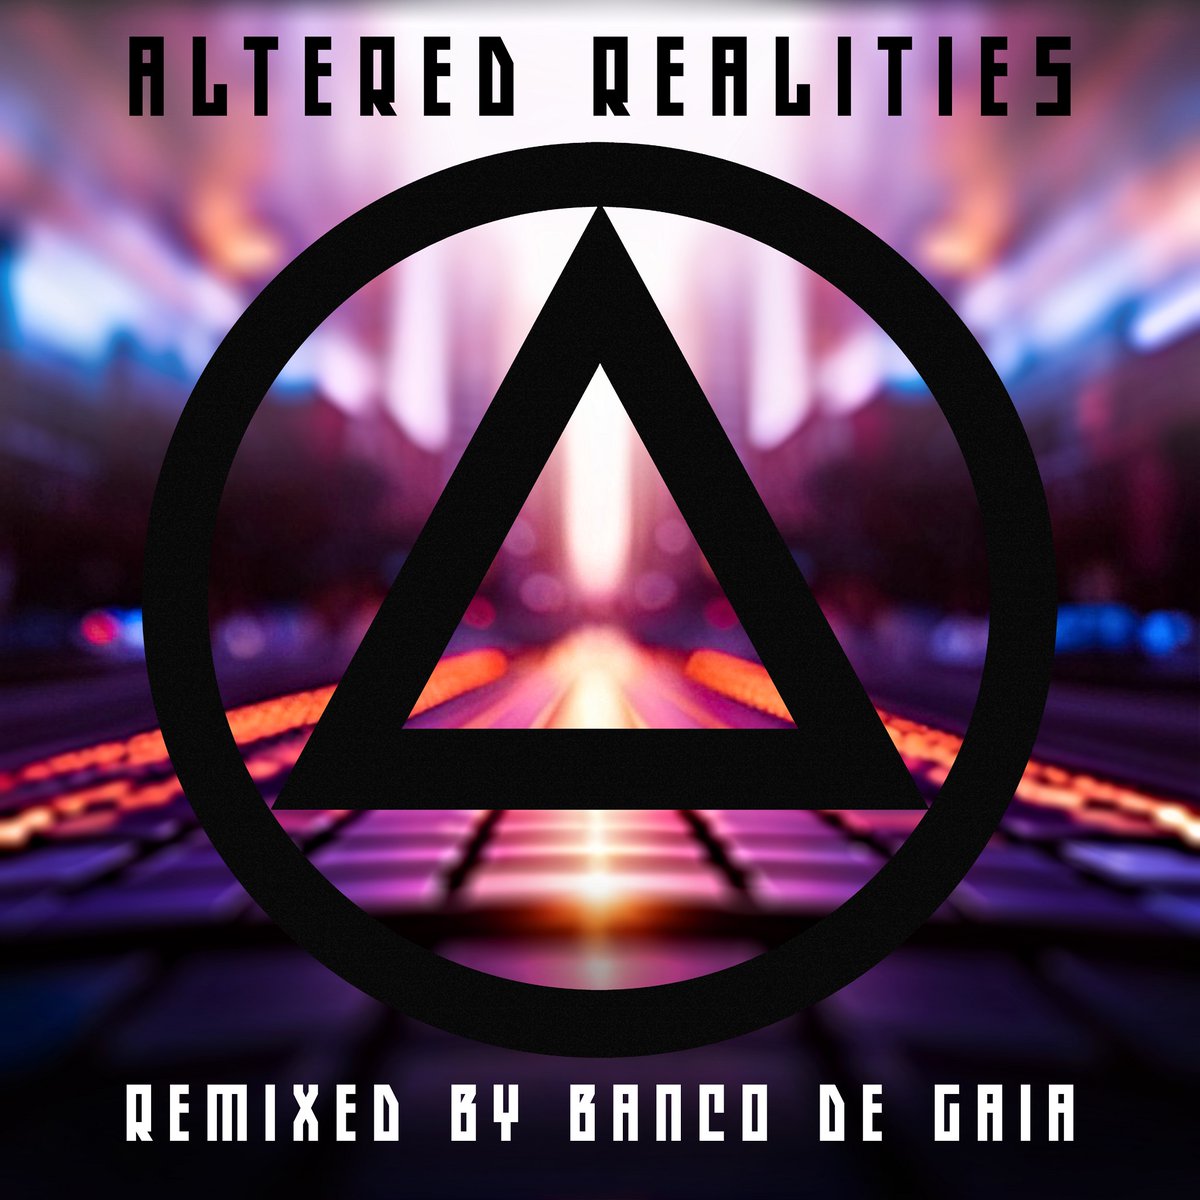 Last year @Telekonoid pointed out that 2023 marked 30 yrs since my 1st remix, which seemed worth celebrating. Only when the collection was nearly done did I work out the 1st came out in 1990! Altered Realities is now available to stream & download from lnk.to/alteredrealiti…